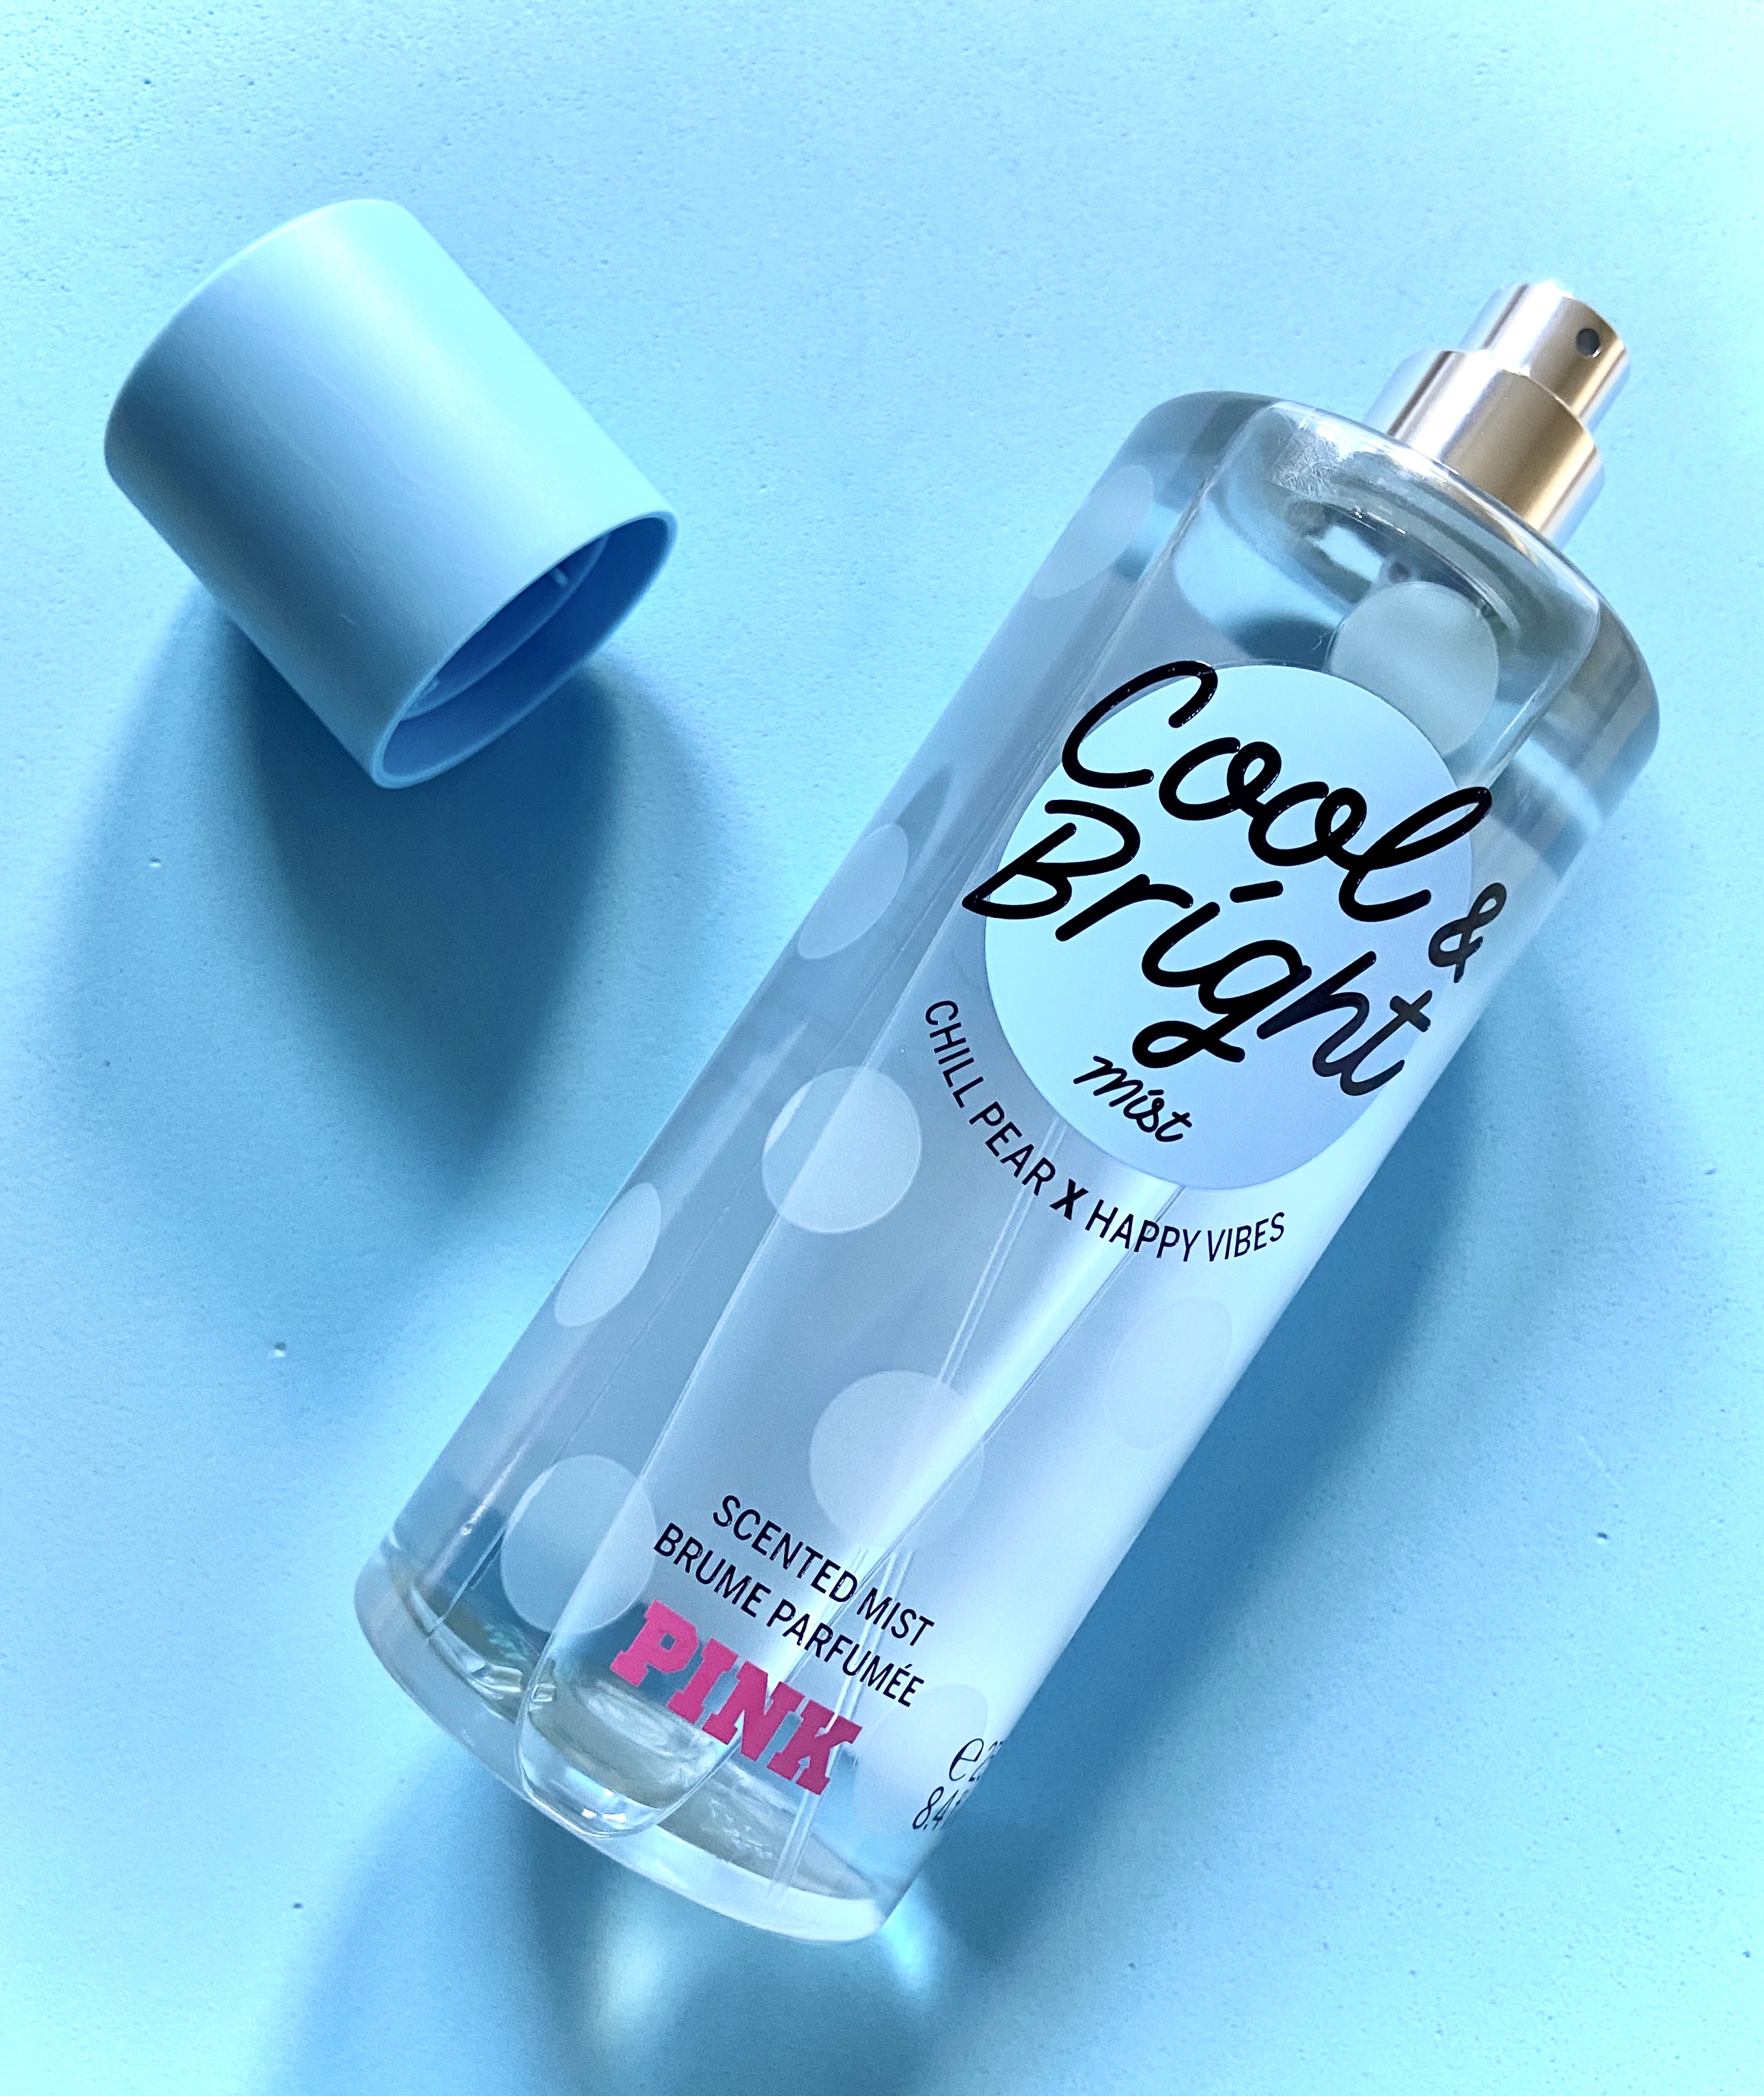 cool and bright pink perfume